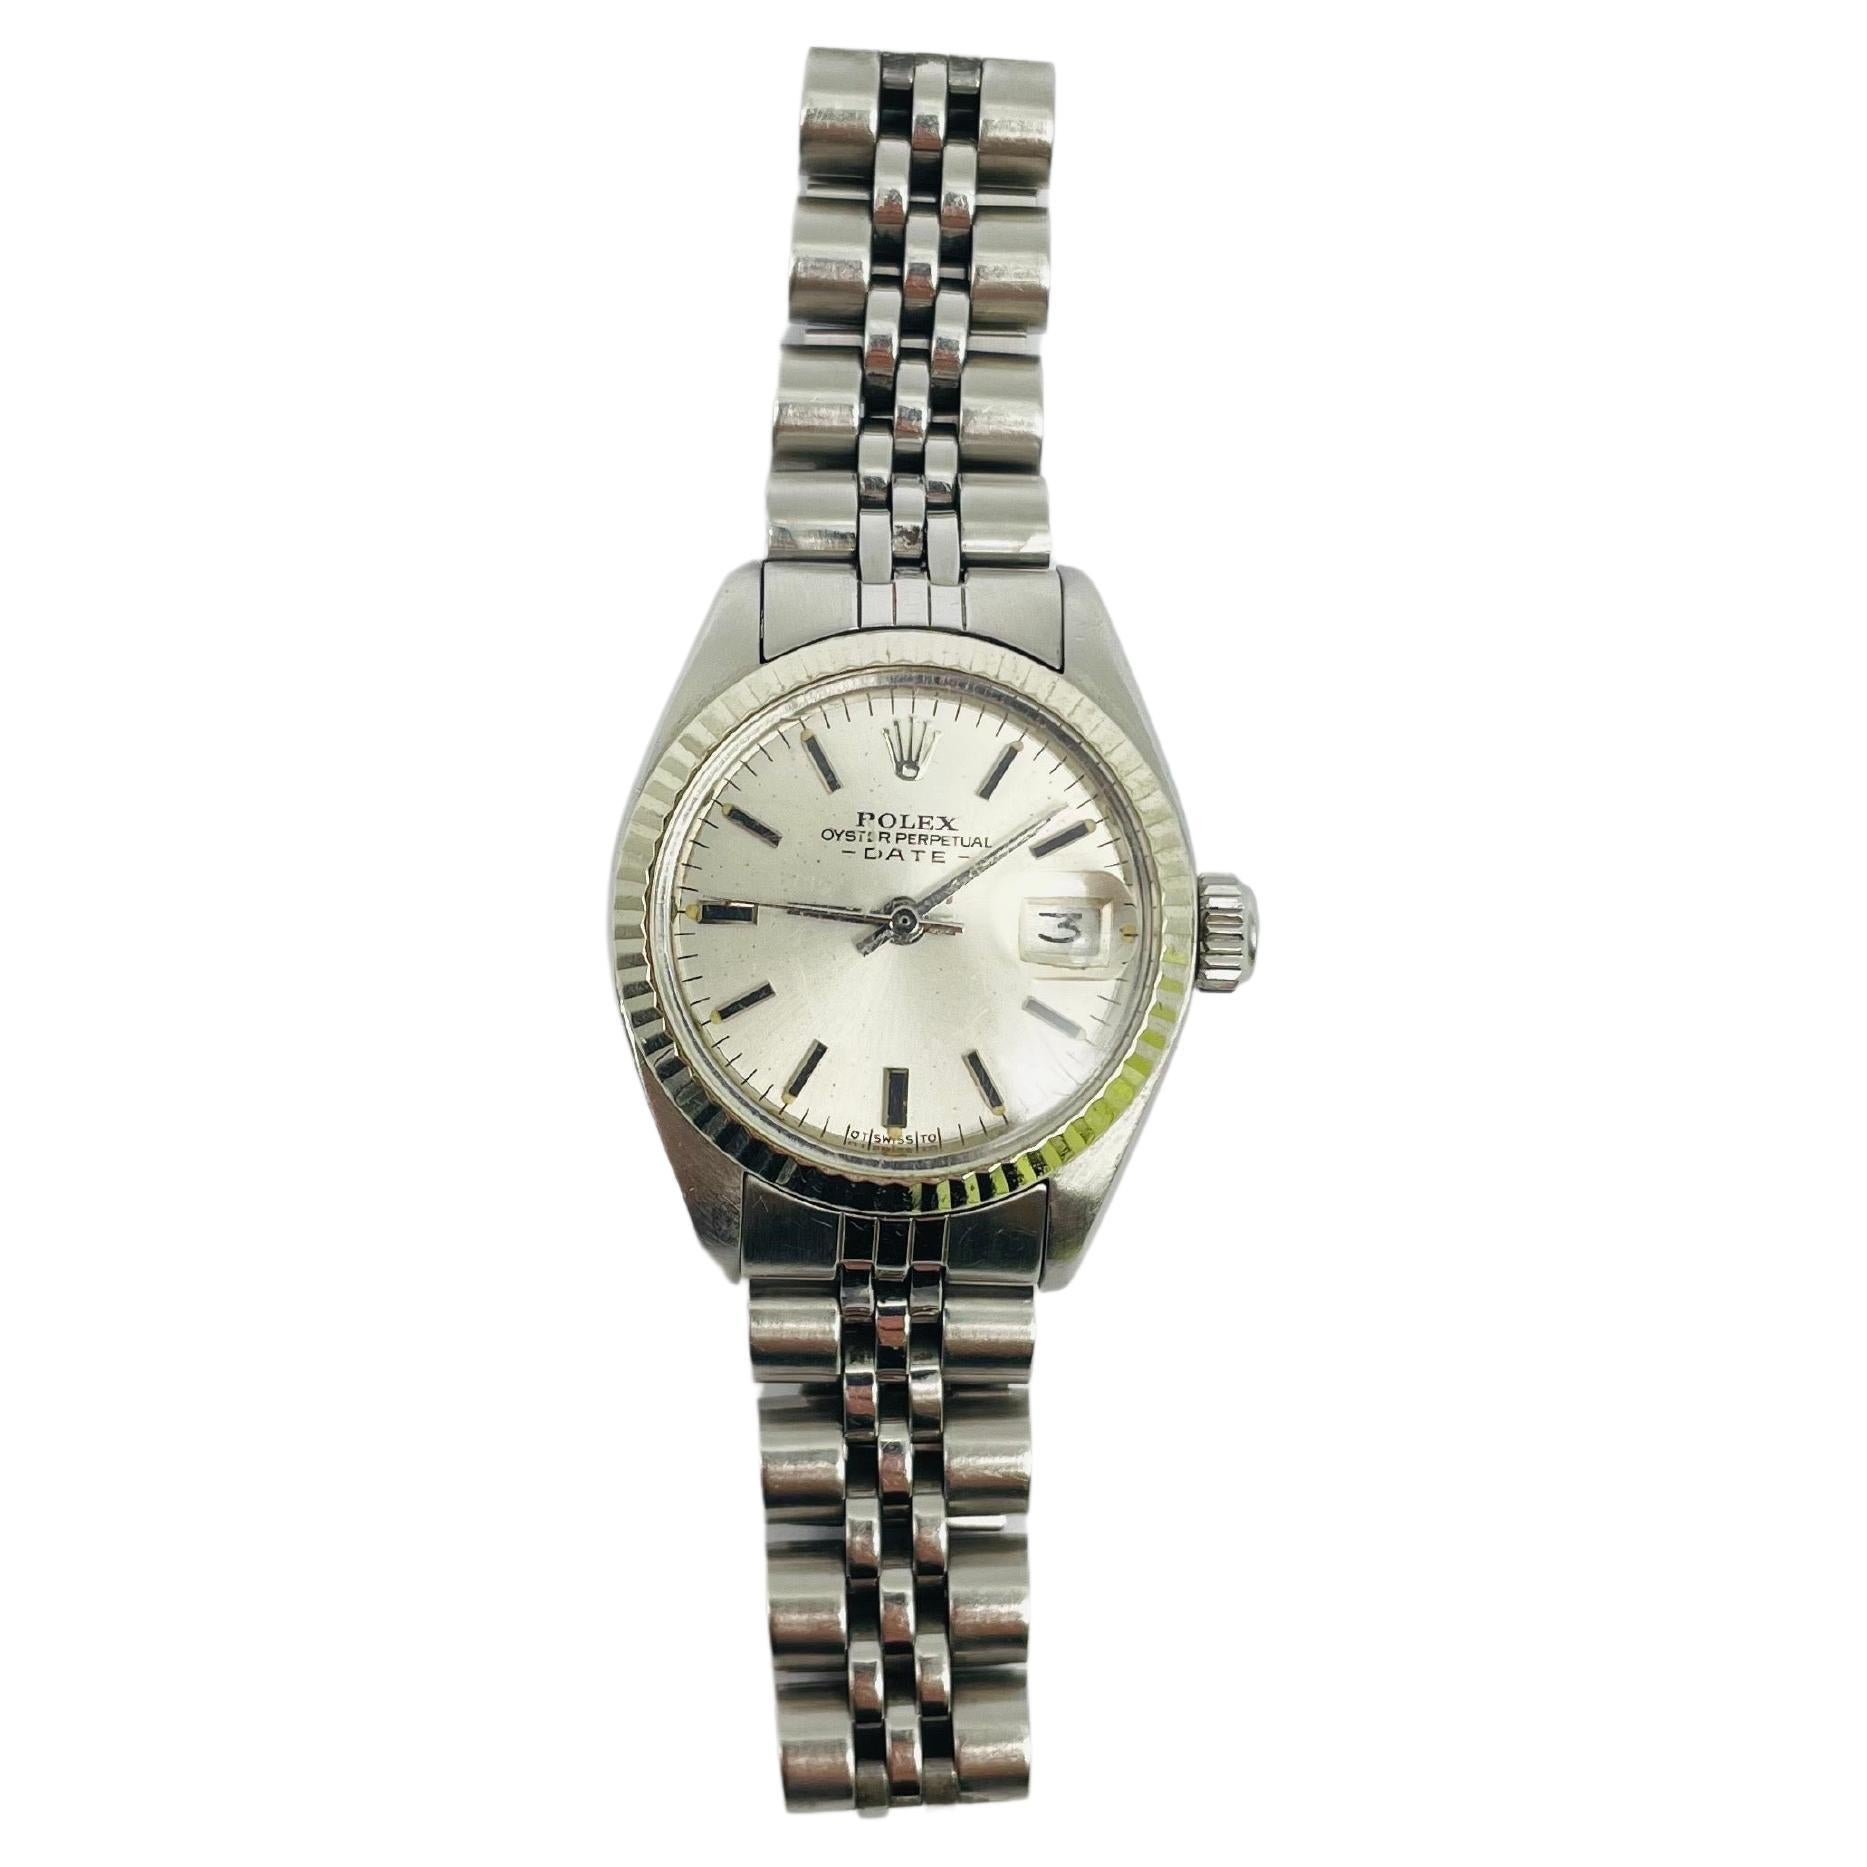 Rolex Oyster Perpetual Date Lady watch, reference 6917 3